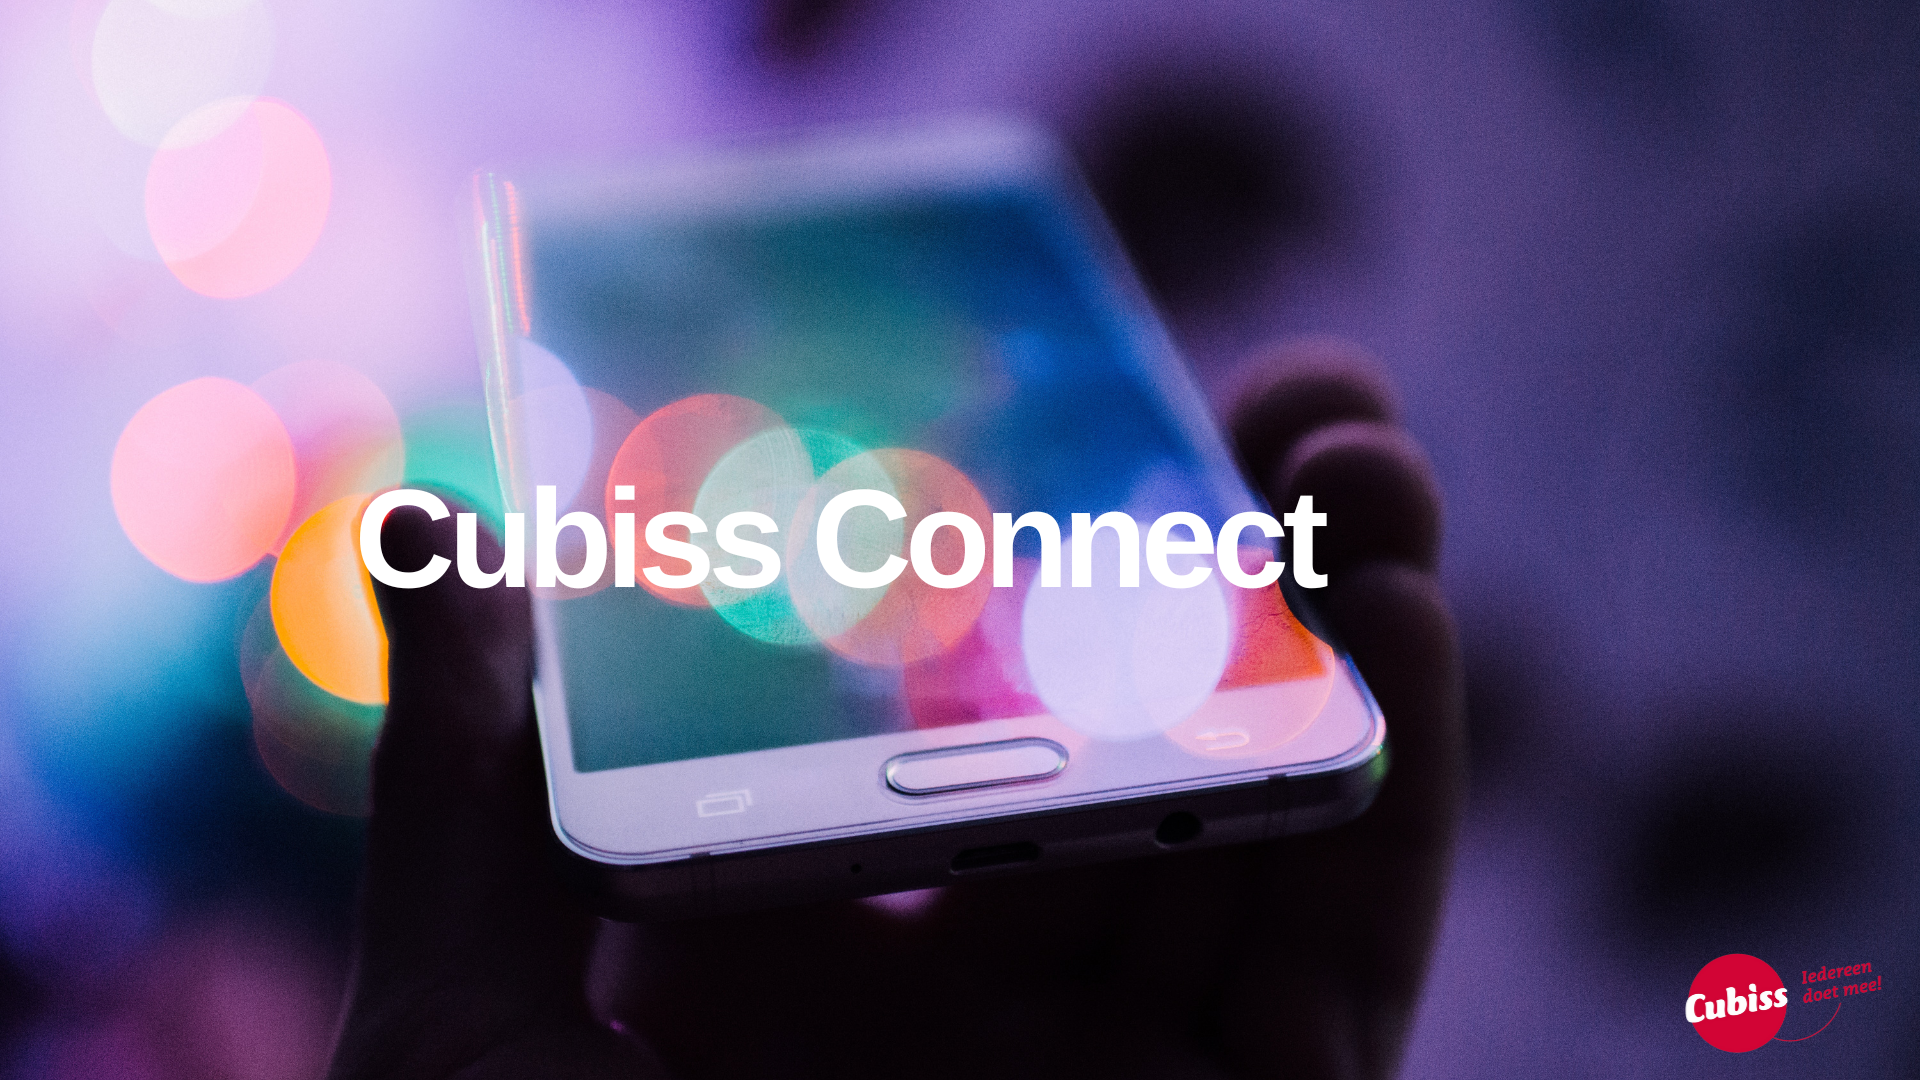 Cubiss Connect